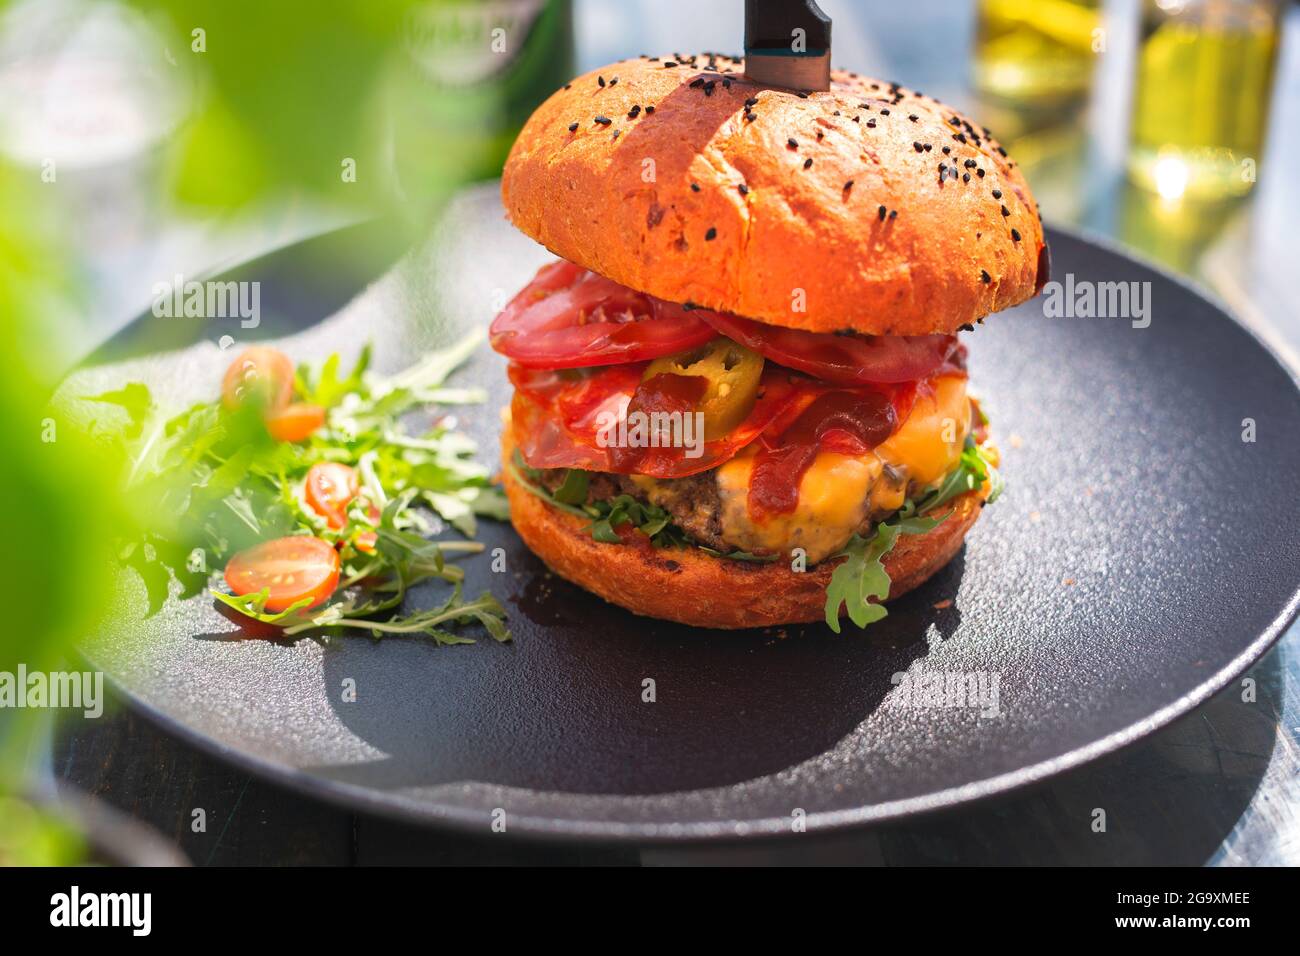 Burger with beef and vegetables, vegetable salad. Fast food. The cook cooks and serves an appetizing dish. The finished dish served on a plate. Servin Stock Photo